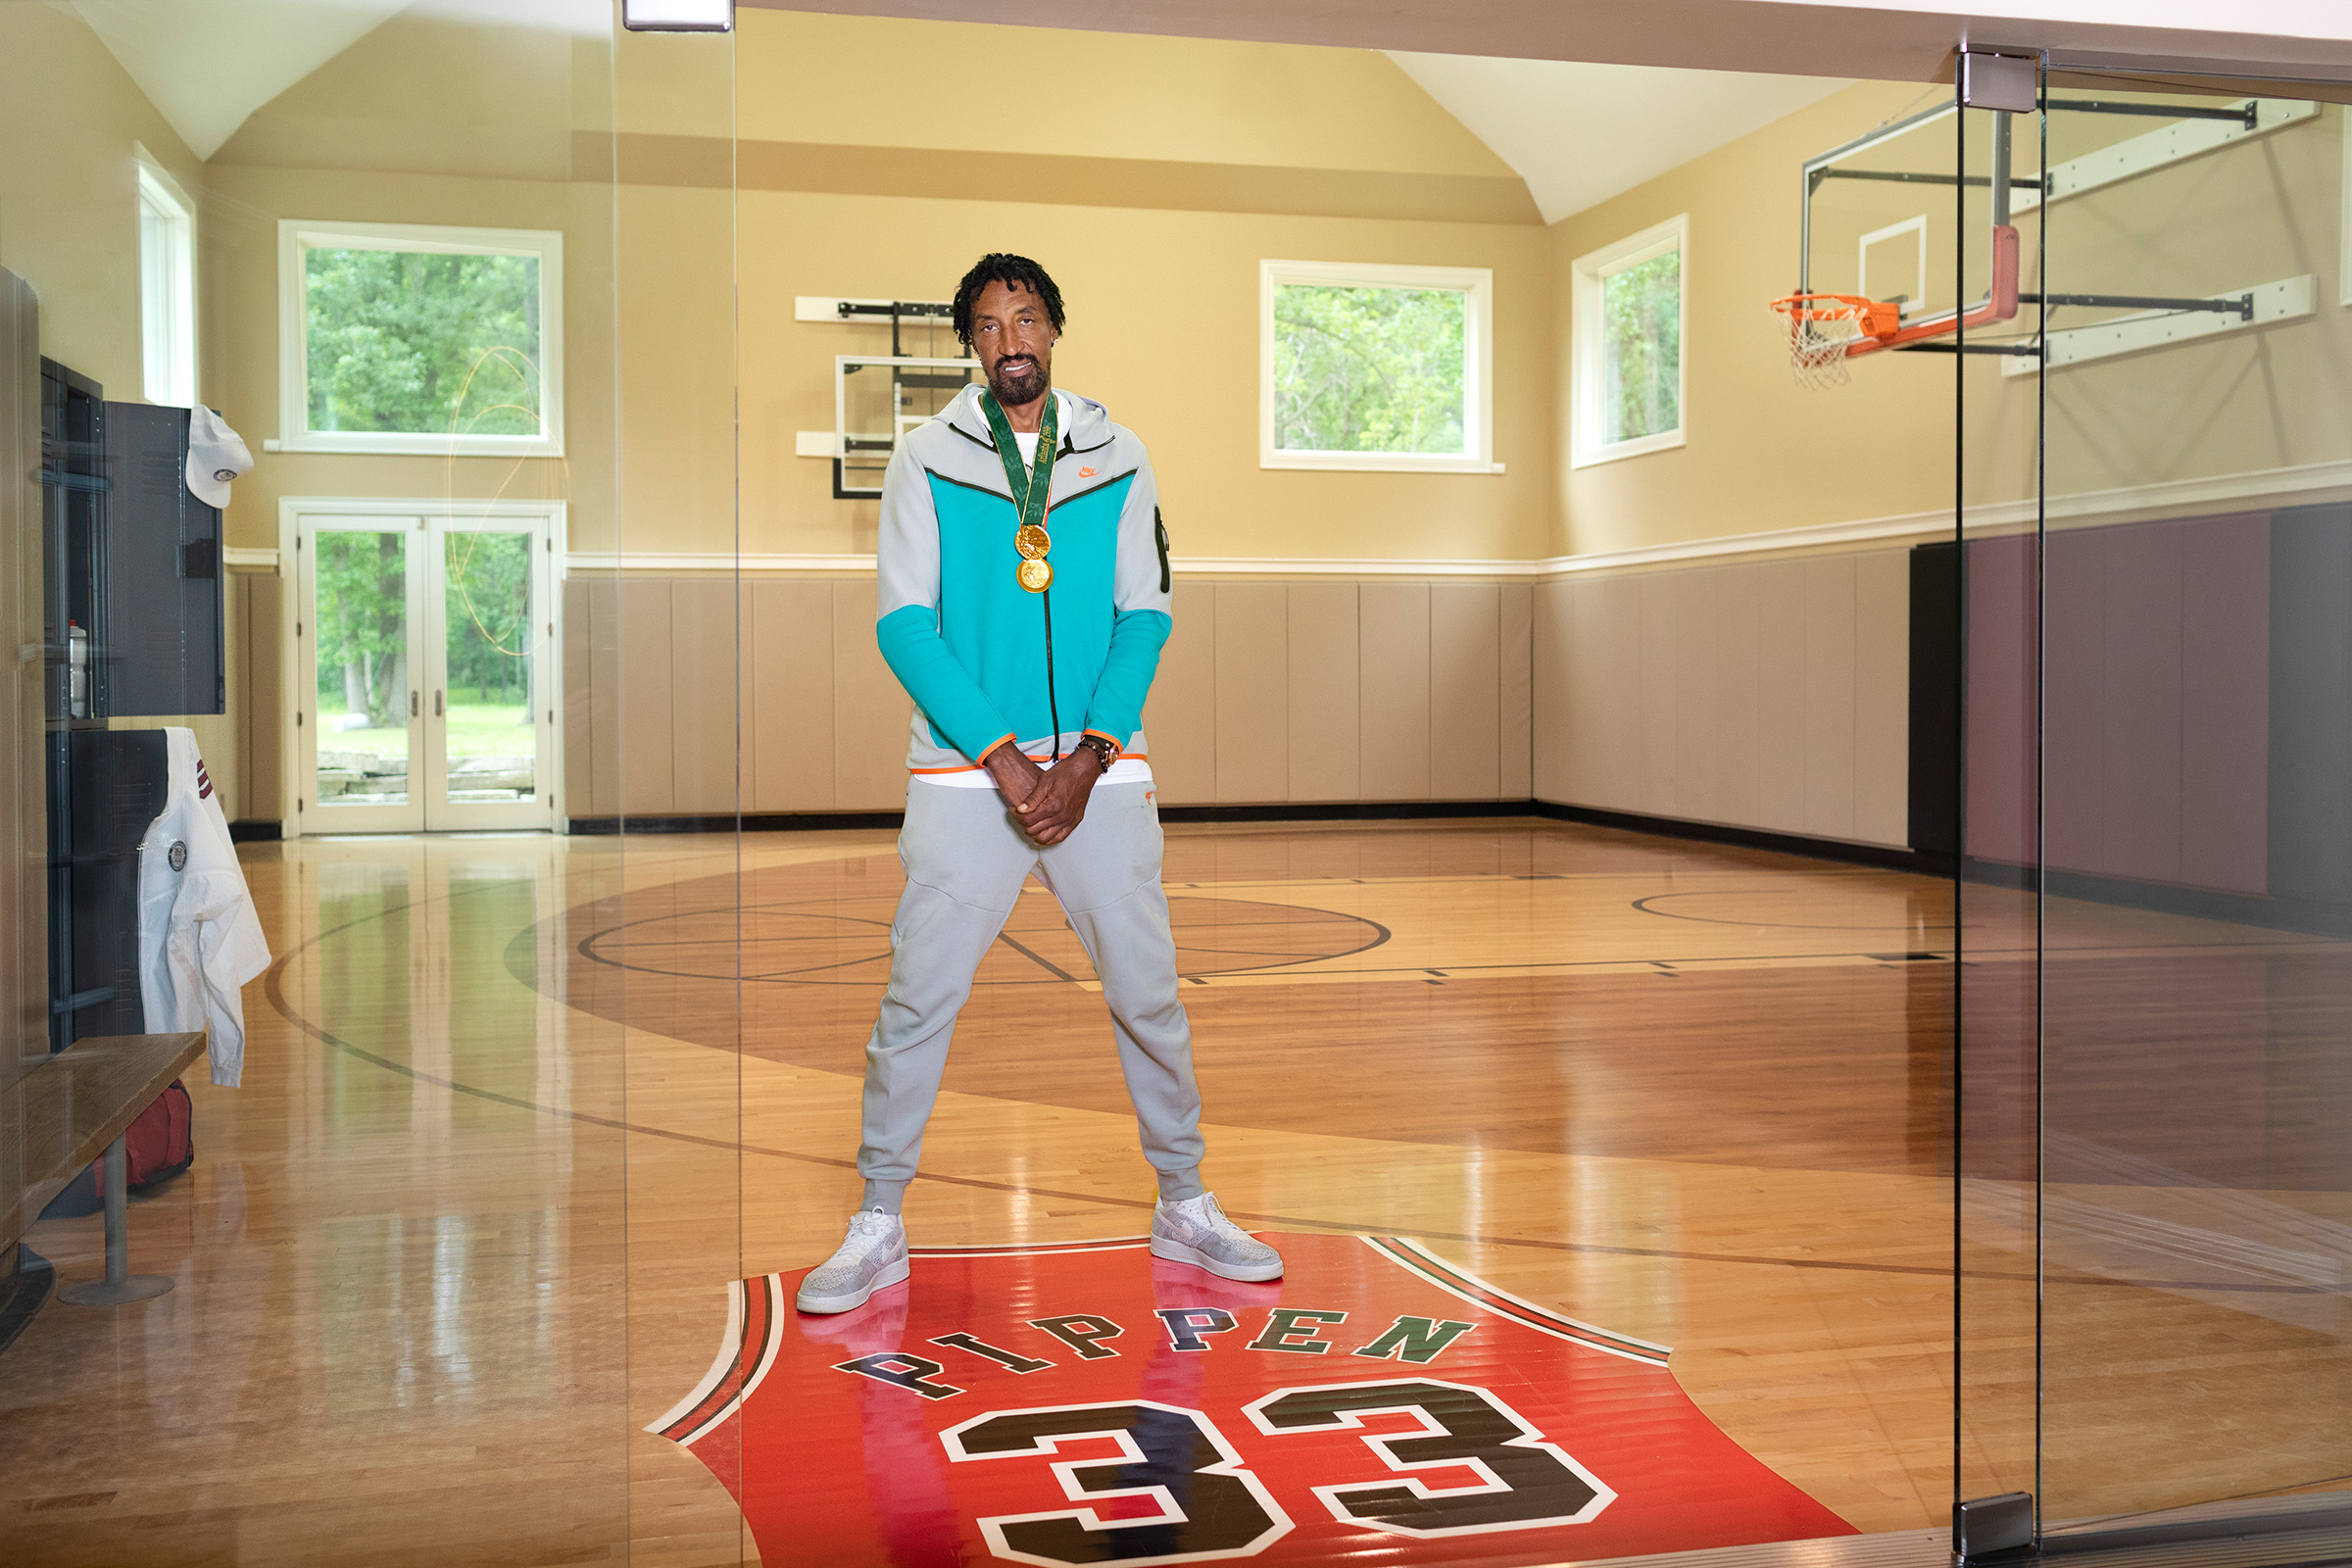 Scottie Pippen stands at the entrance of his indoor basketball court which has a custom #33 jersey printed on the floor.